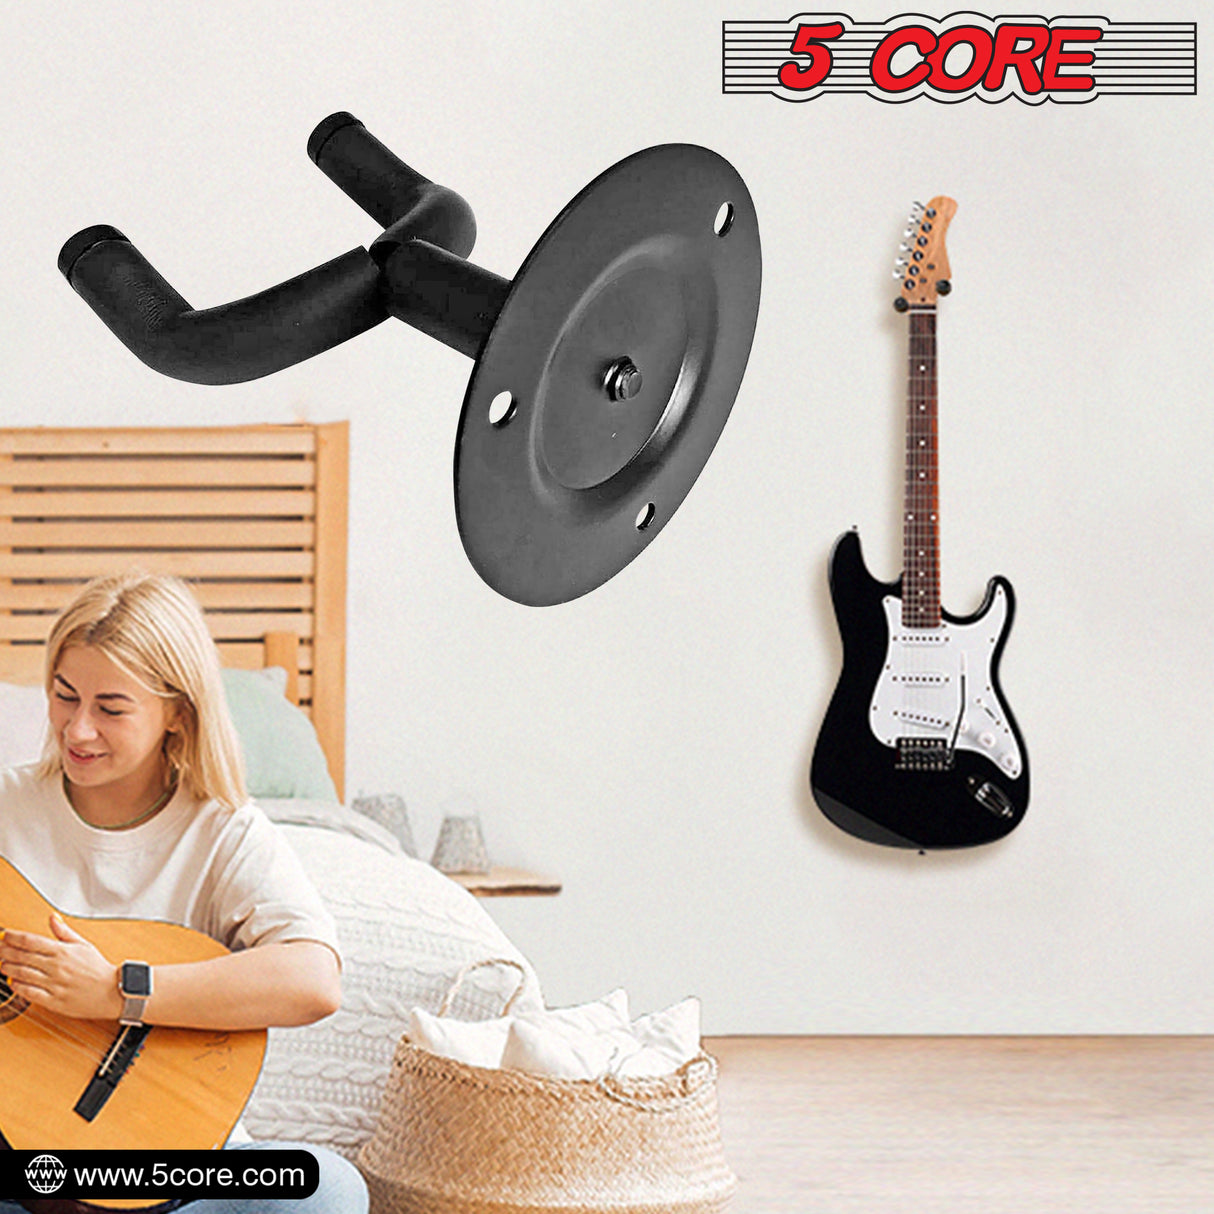 Guitar Wall Mount, Black Guitar Wall Hanger| 2 Pack Guitar Hanger| V-Shaped Secure and Sturdy Guitar Holder Wall Mount| Guitar Accessories for Acoustic, Electric, Bass Guitar,  Mandolin- GH ST 2PCS